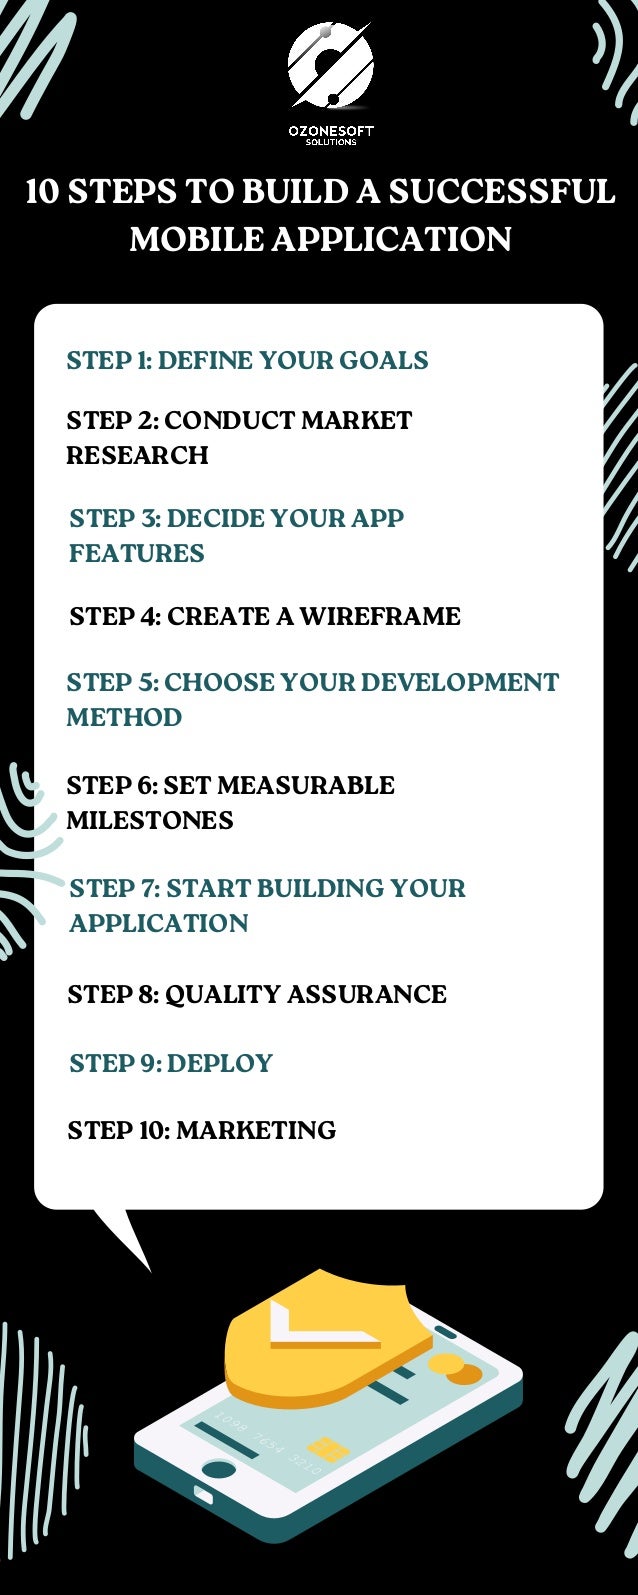 10 STEPS TO BUILD A SUCCESSFUL
MOBILE APPLICATION
STEP 3: DECIDE YOUR APP
FEATURES
STEP 4: CREATE A WIREFRAME
STEP 5: CHOOSE YOUR DEVELOPMENT
METHOD
STEP 6: SET MEASURABLE
MILESTONES
STEP 7: START BUILDING YOUR
APPLICATION
STEP 8: QUALITY ASSURANCE
STEP 9: DEPLOY
STEP 10: MARKETING
STEP 2: CONDUCT MARKET
RESEARCH
STEP 1: DEFINE YOUR GOALS
 